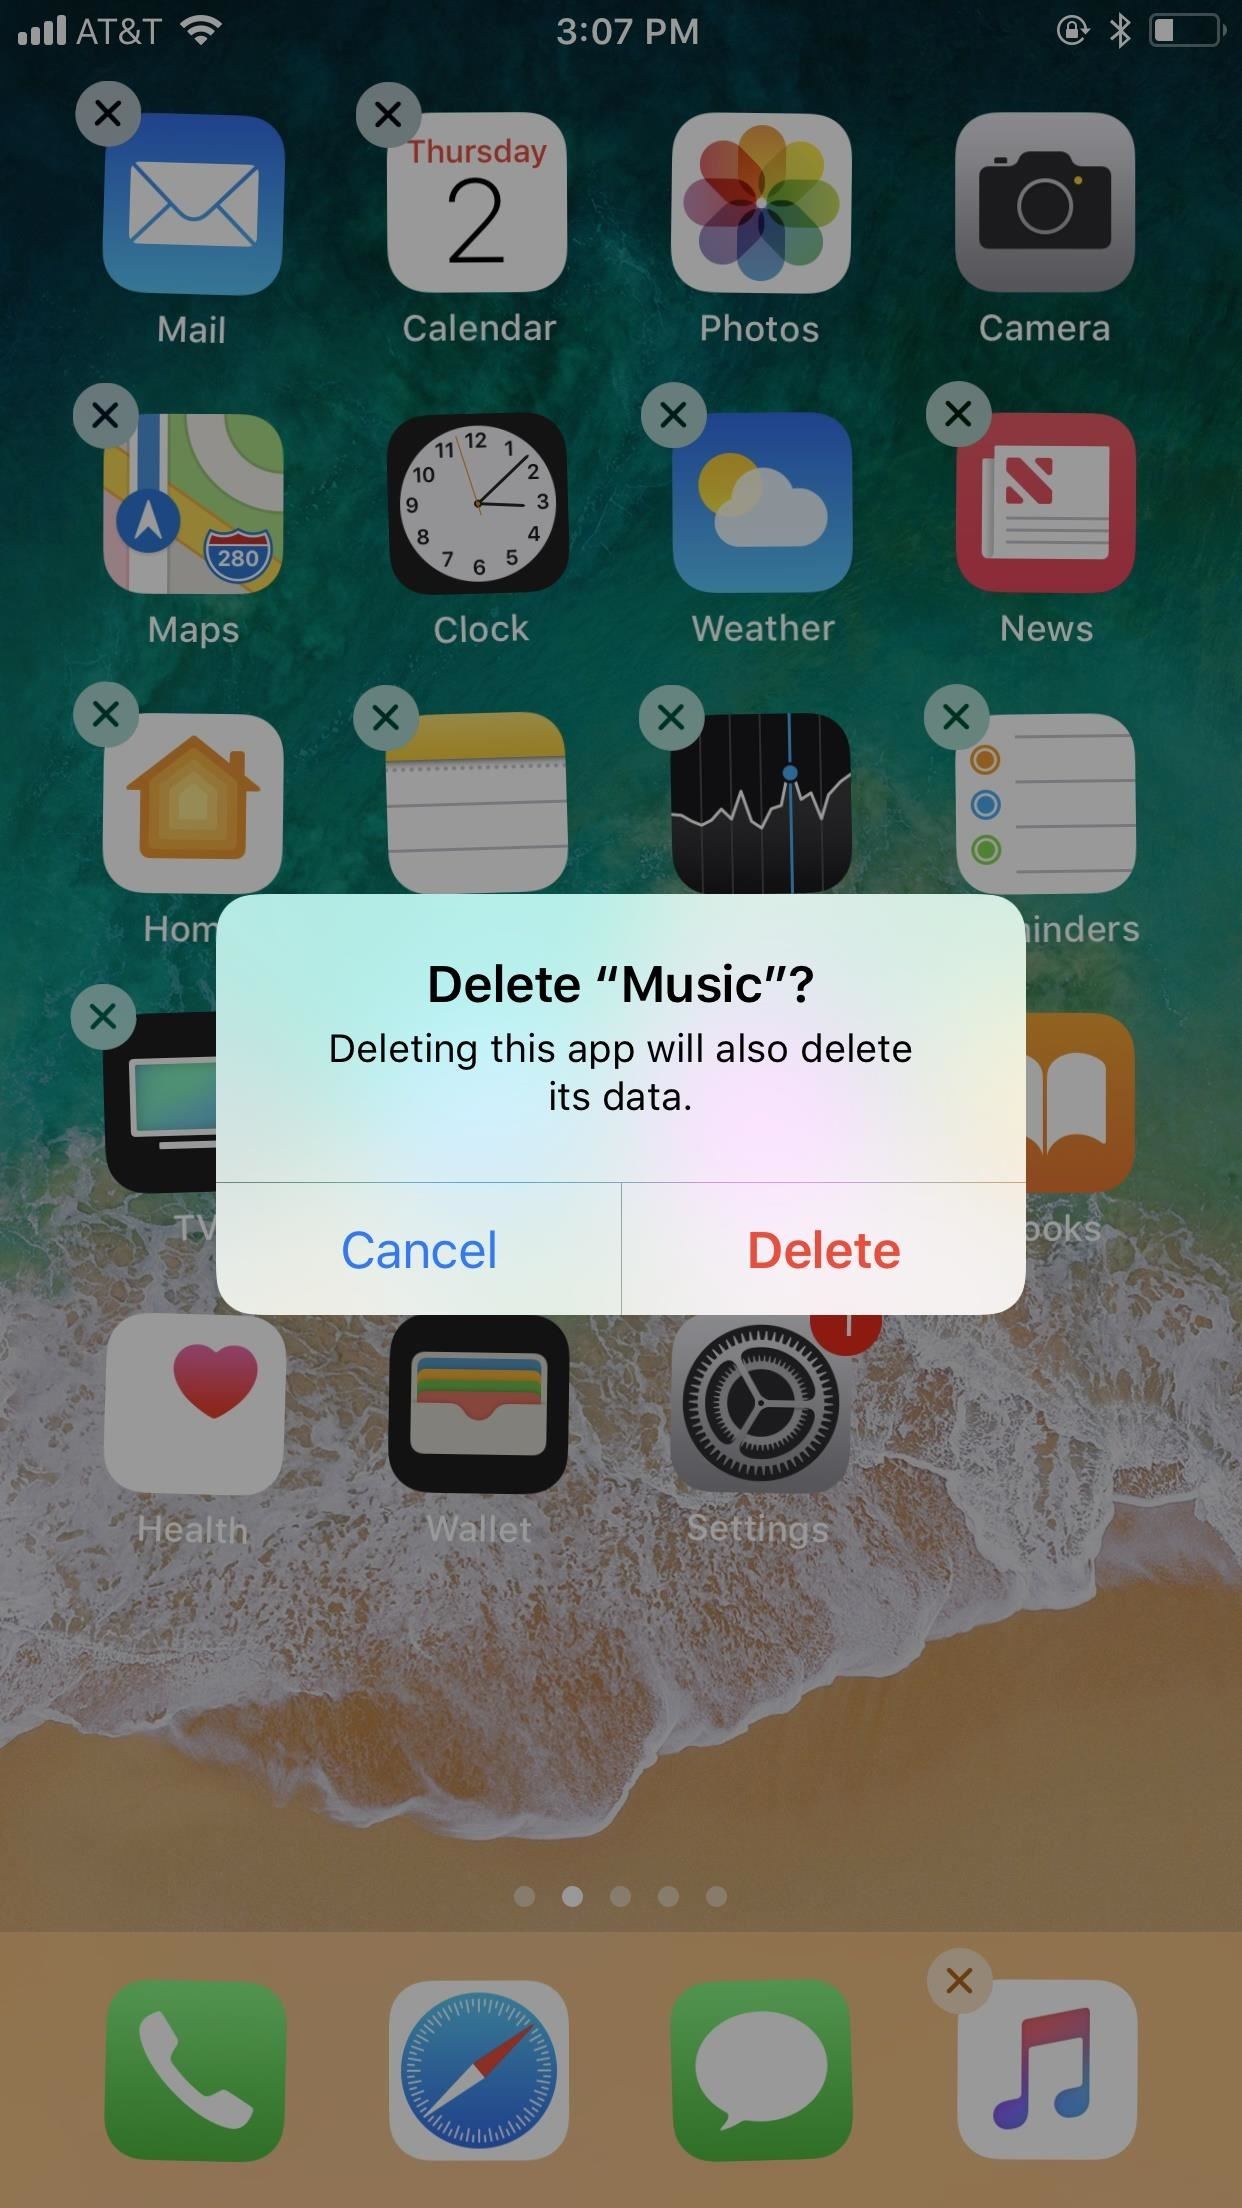 Same Song Starts Playing in Your Car When Connecting Your iPhone? Avoid the Problem with These 6 Tips